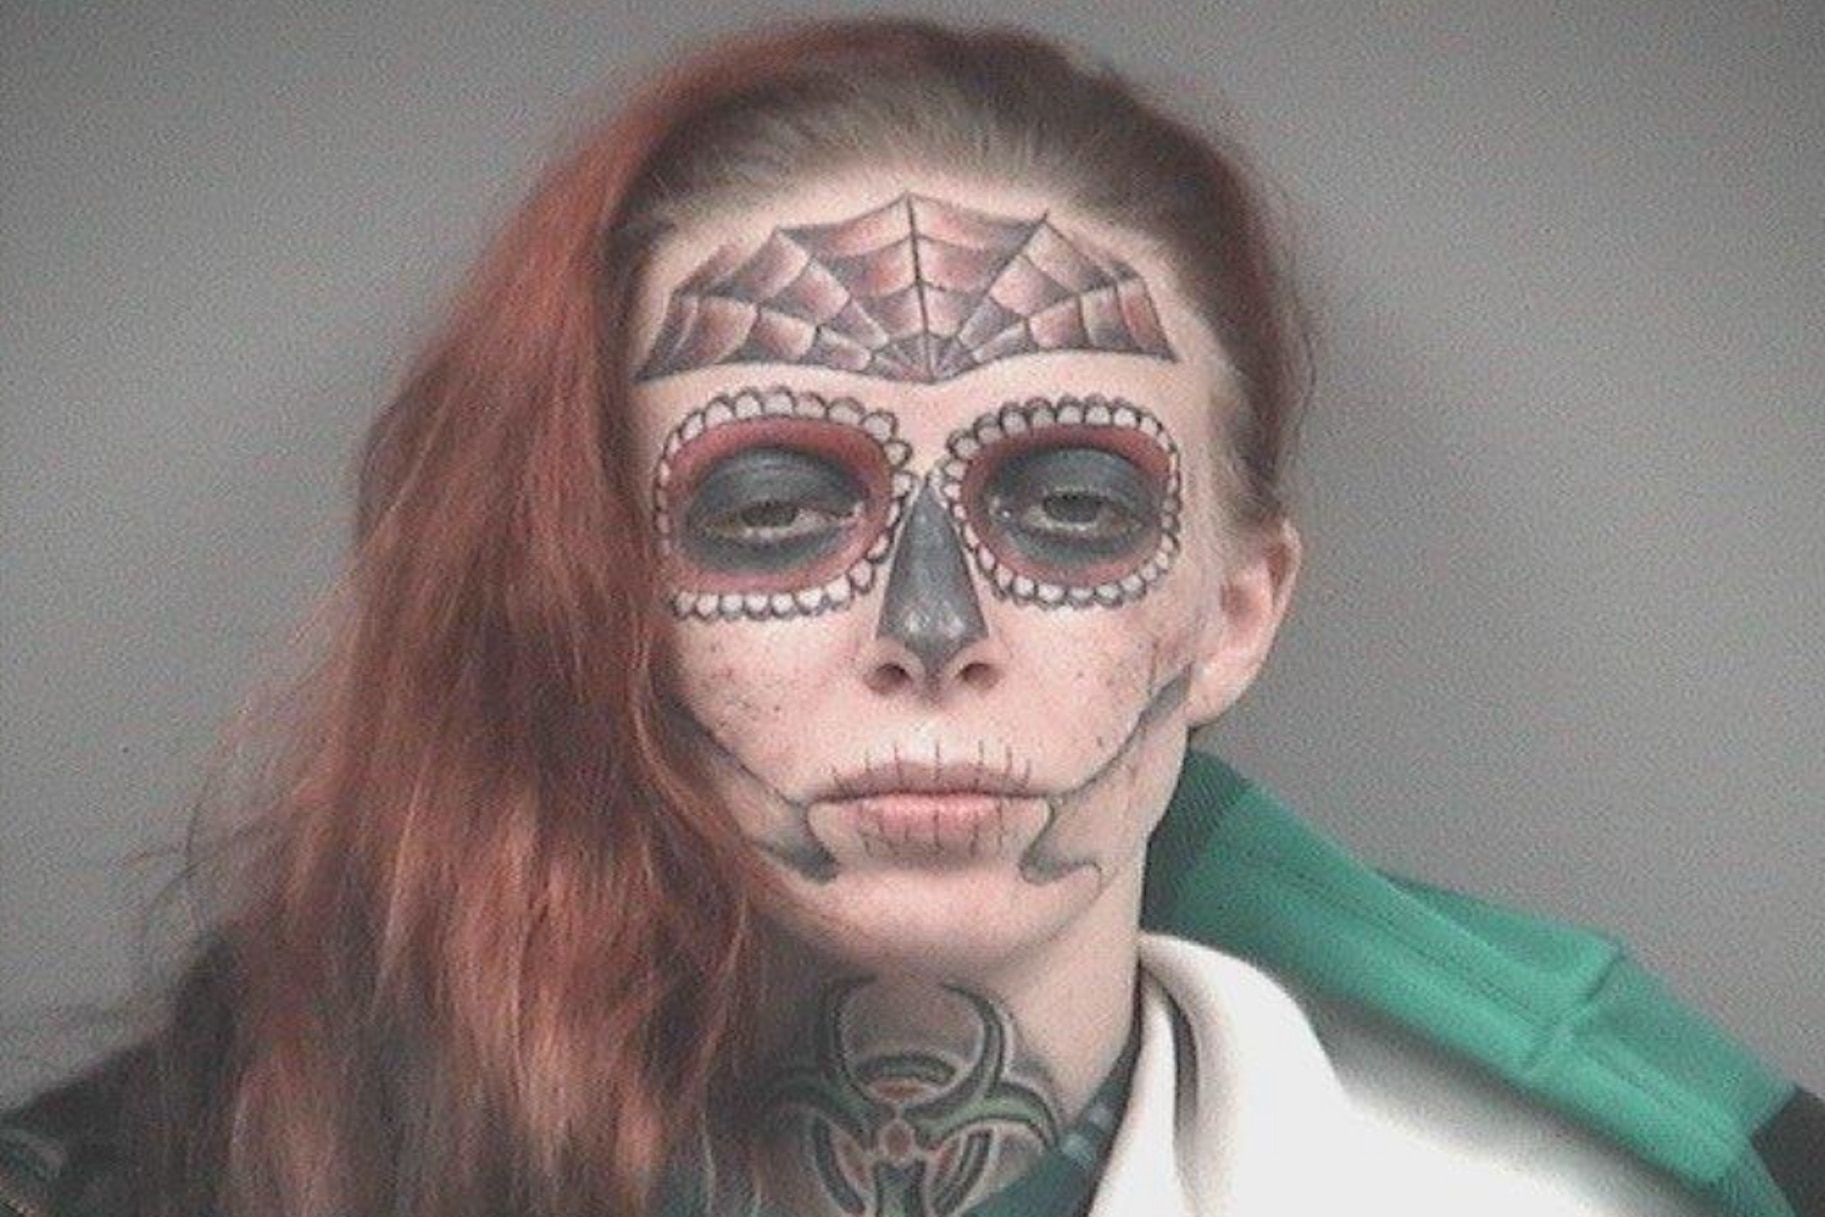 Woman With Creepy FullFace Skull Tattoo Arrested for Third Time in Six  Months